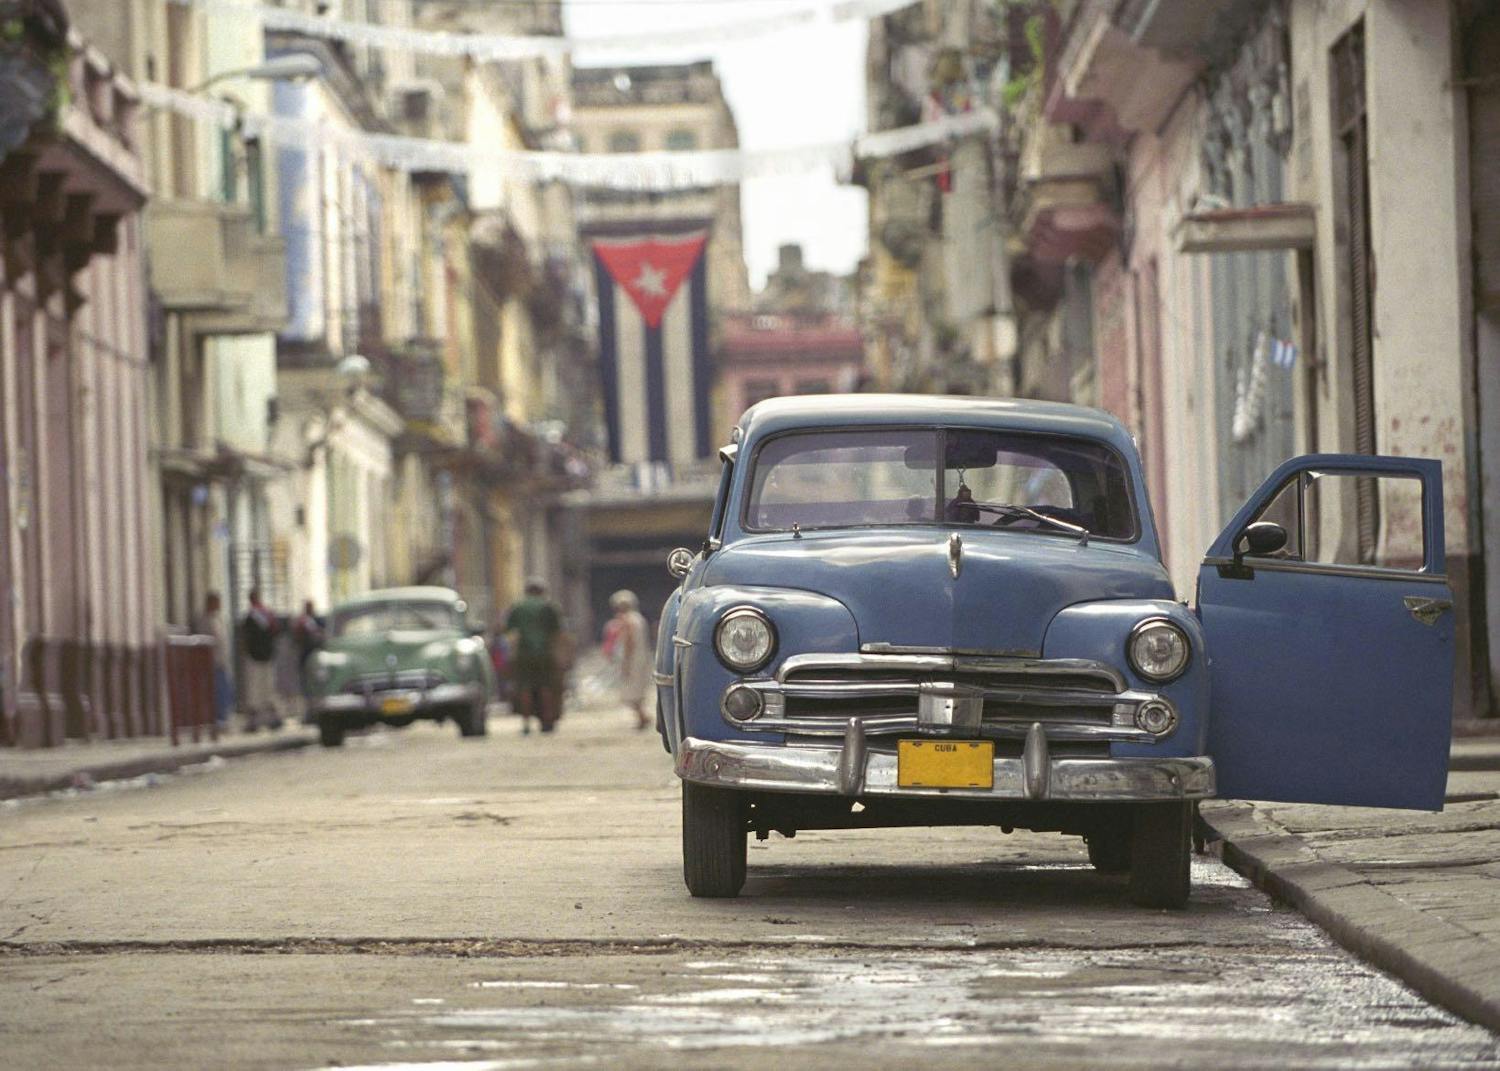 An old blue car parked on an empty street in havana with the cuban flag hanging